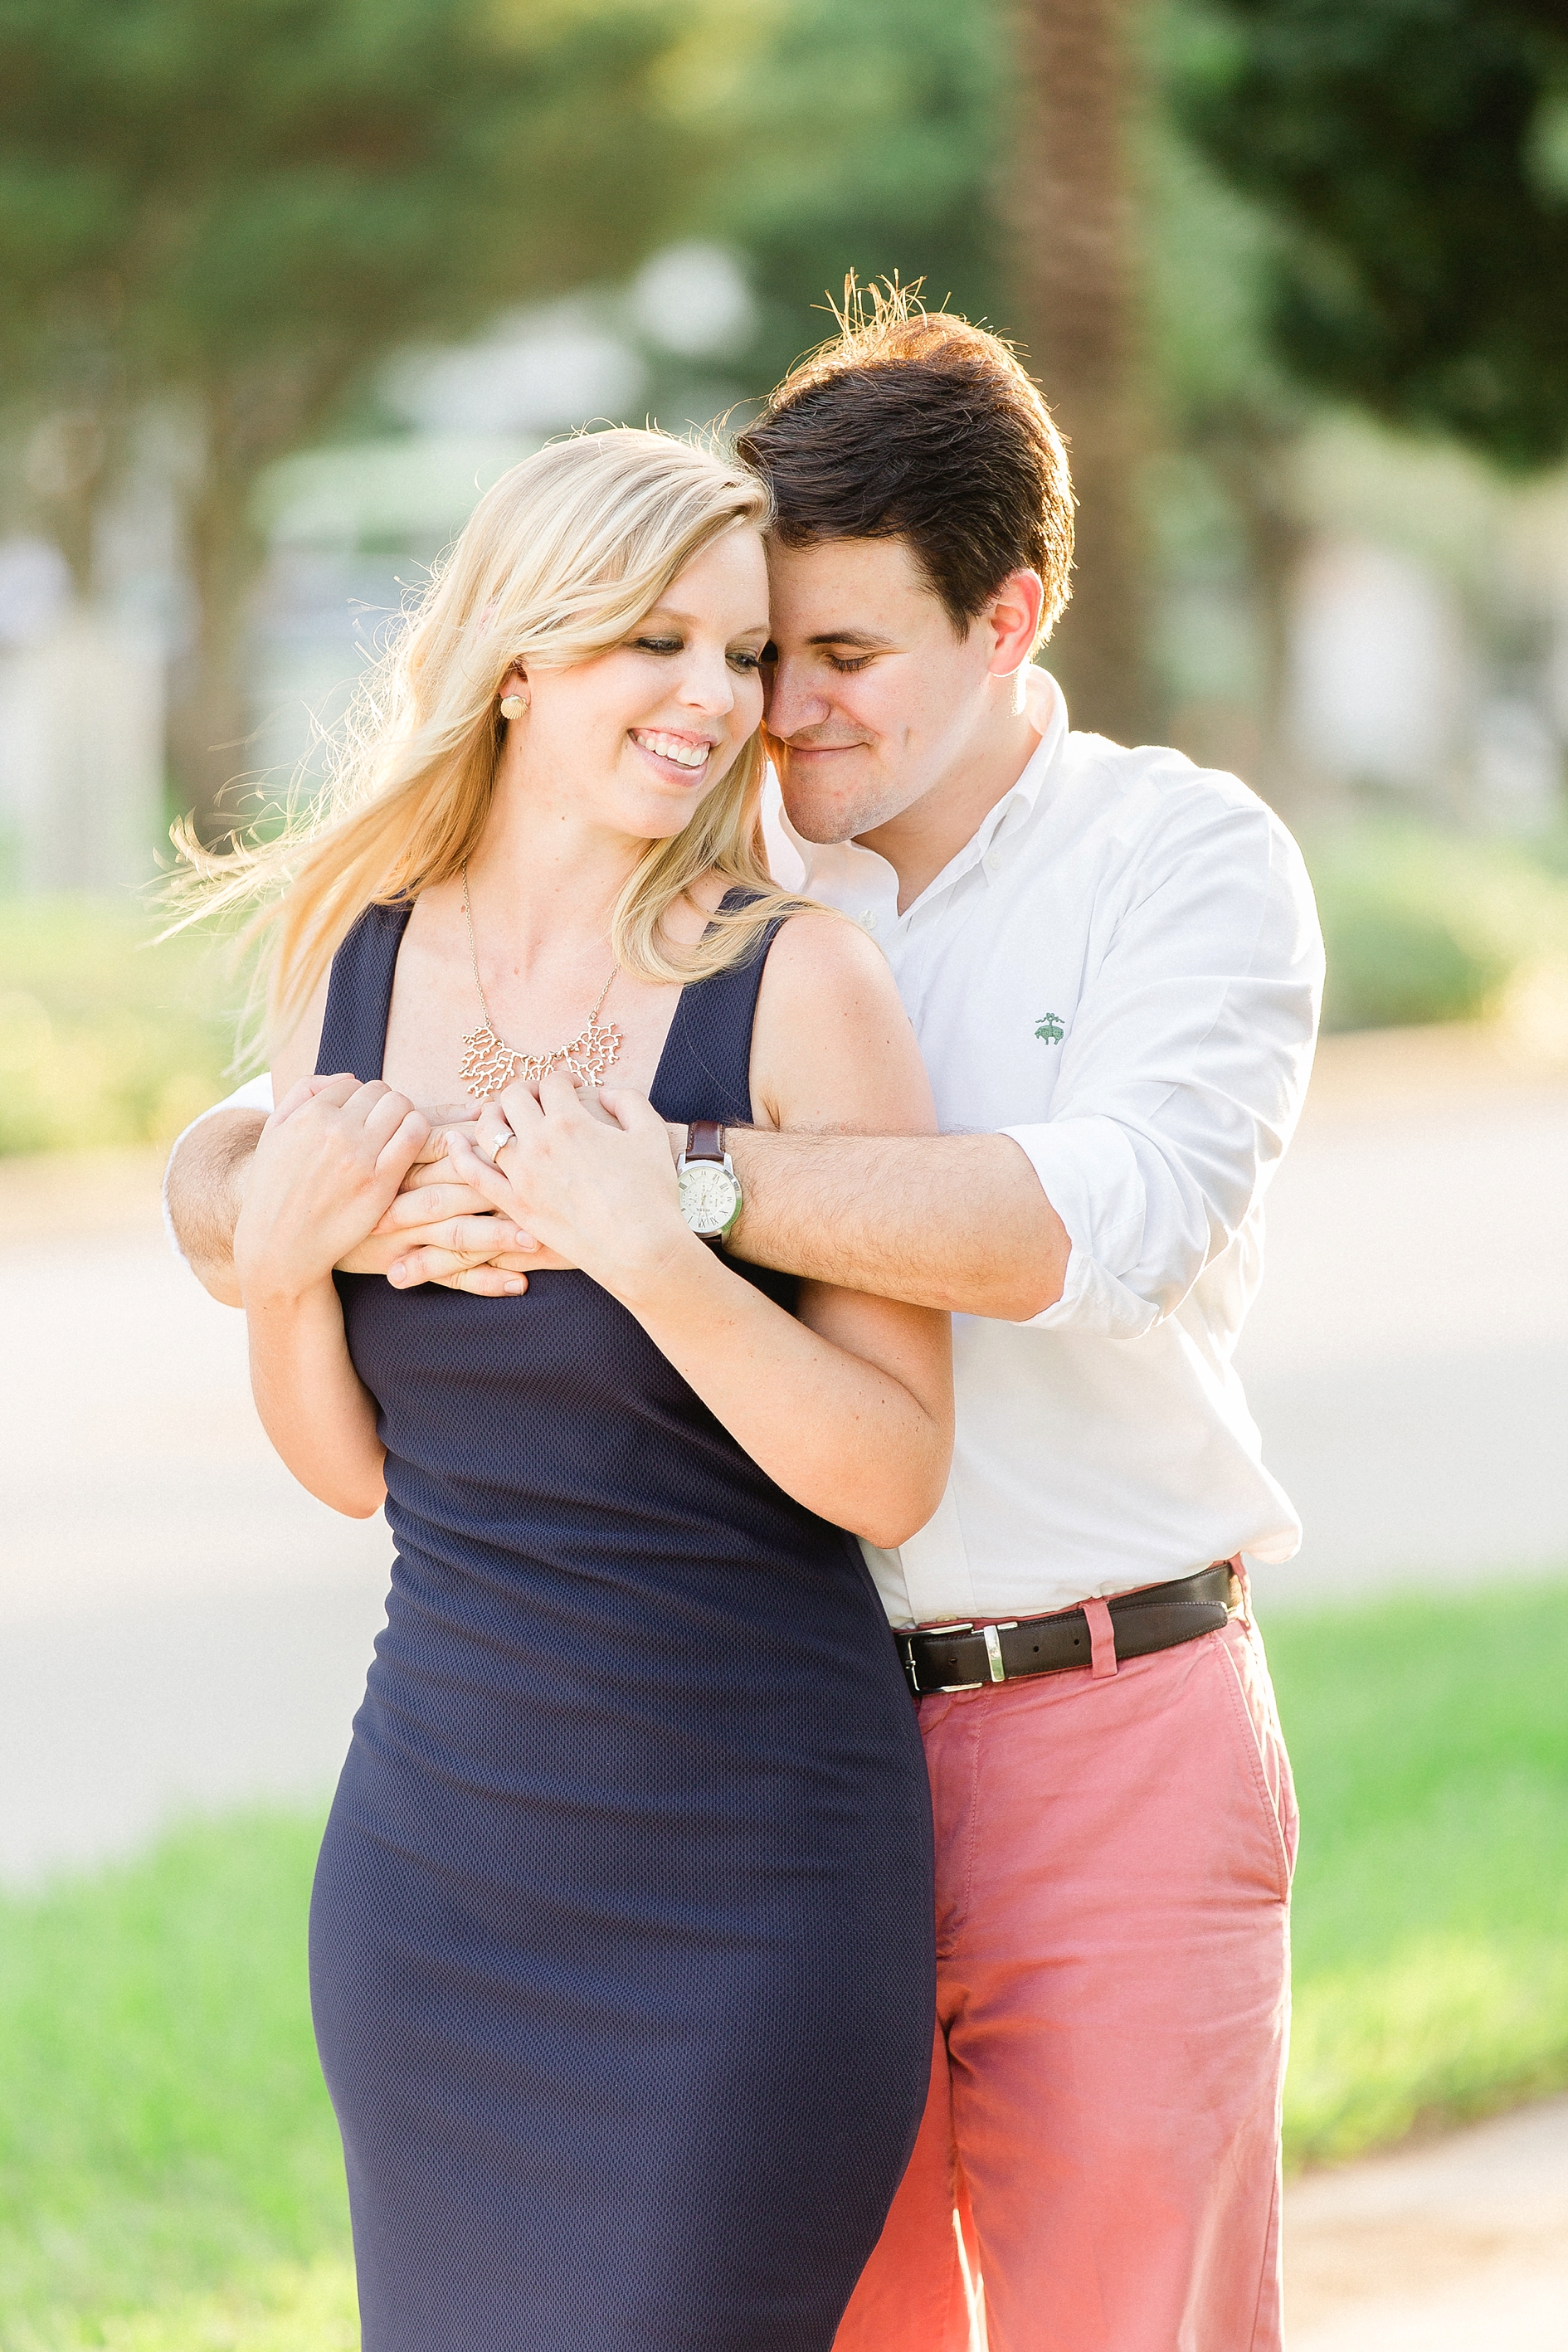 Downtown St. Petersburg Engagement | © Ailyn La Torre Photography 2015